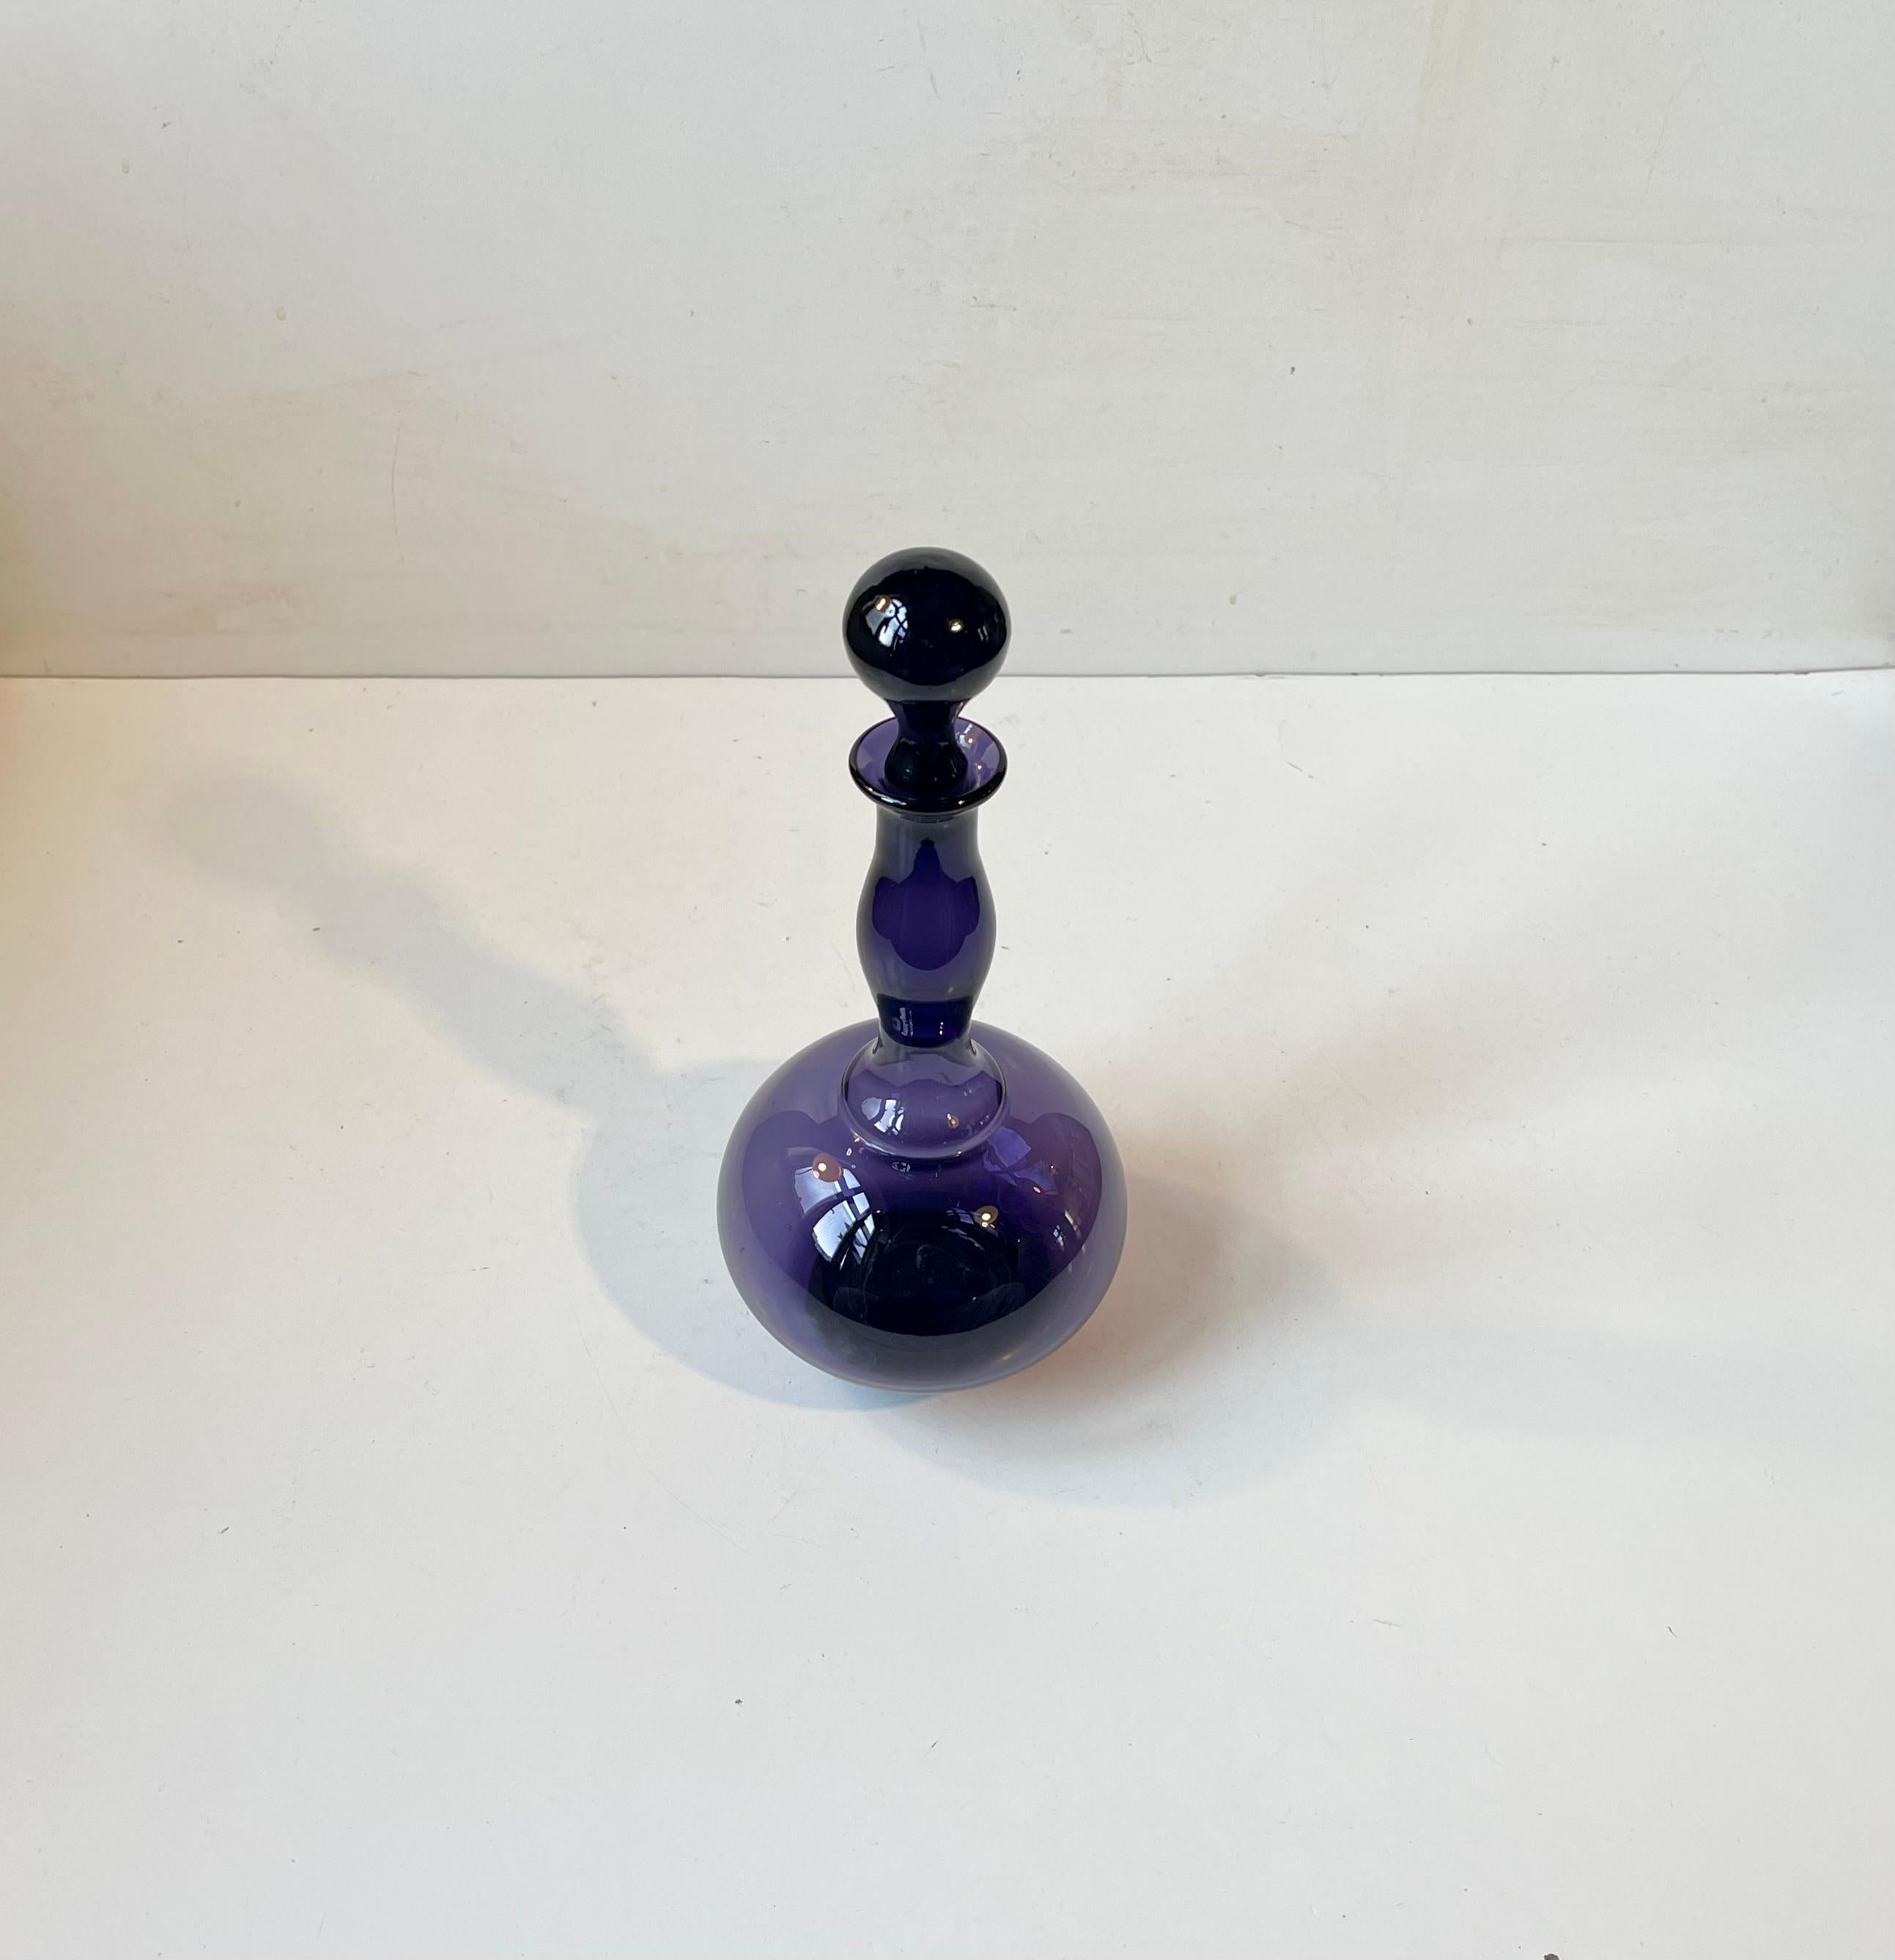 A rare purple - dark violet art glass decanter catalogued as 'No Name, Art Glass' in the Holmegaard Catalogue from 1958. It was designed by Jacob Eiler Bang and hand-blown at Holmegaard in Denmark during the late 1950s. Jacob Bang was the kid bother